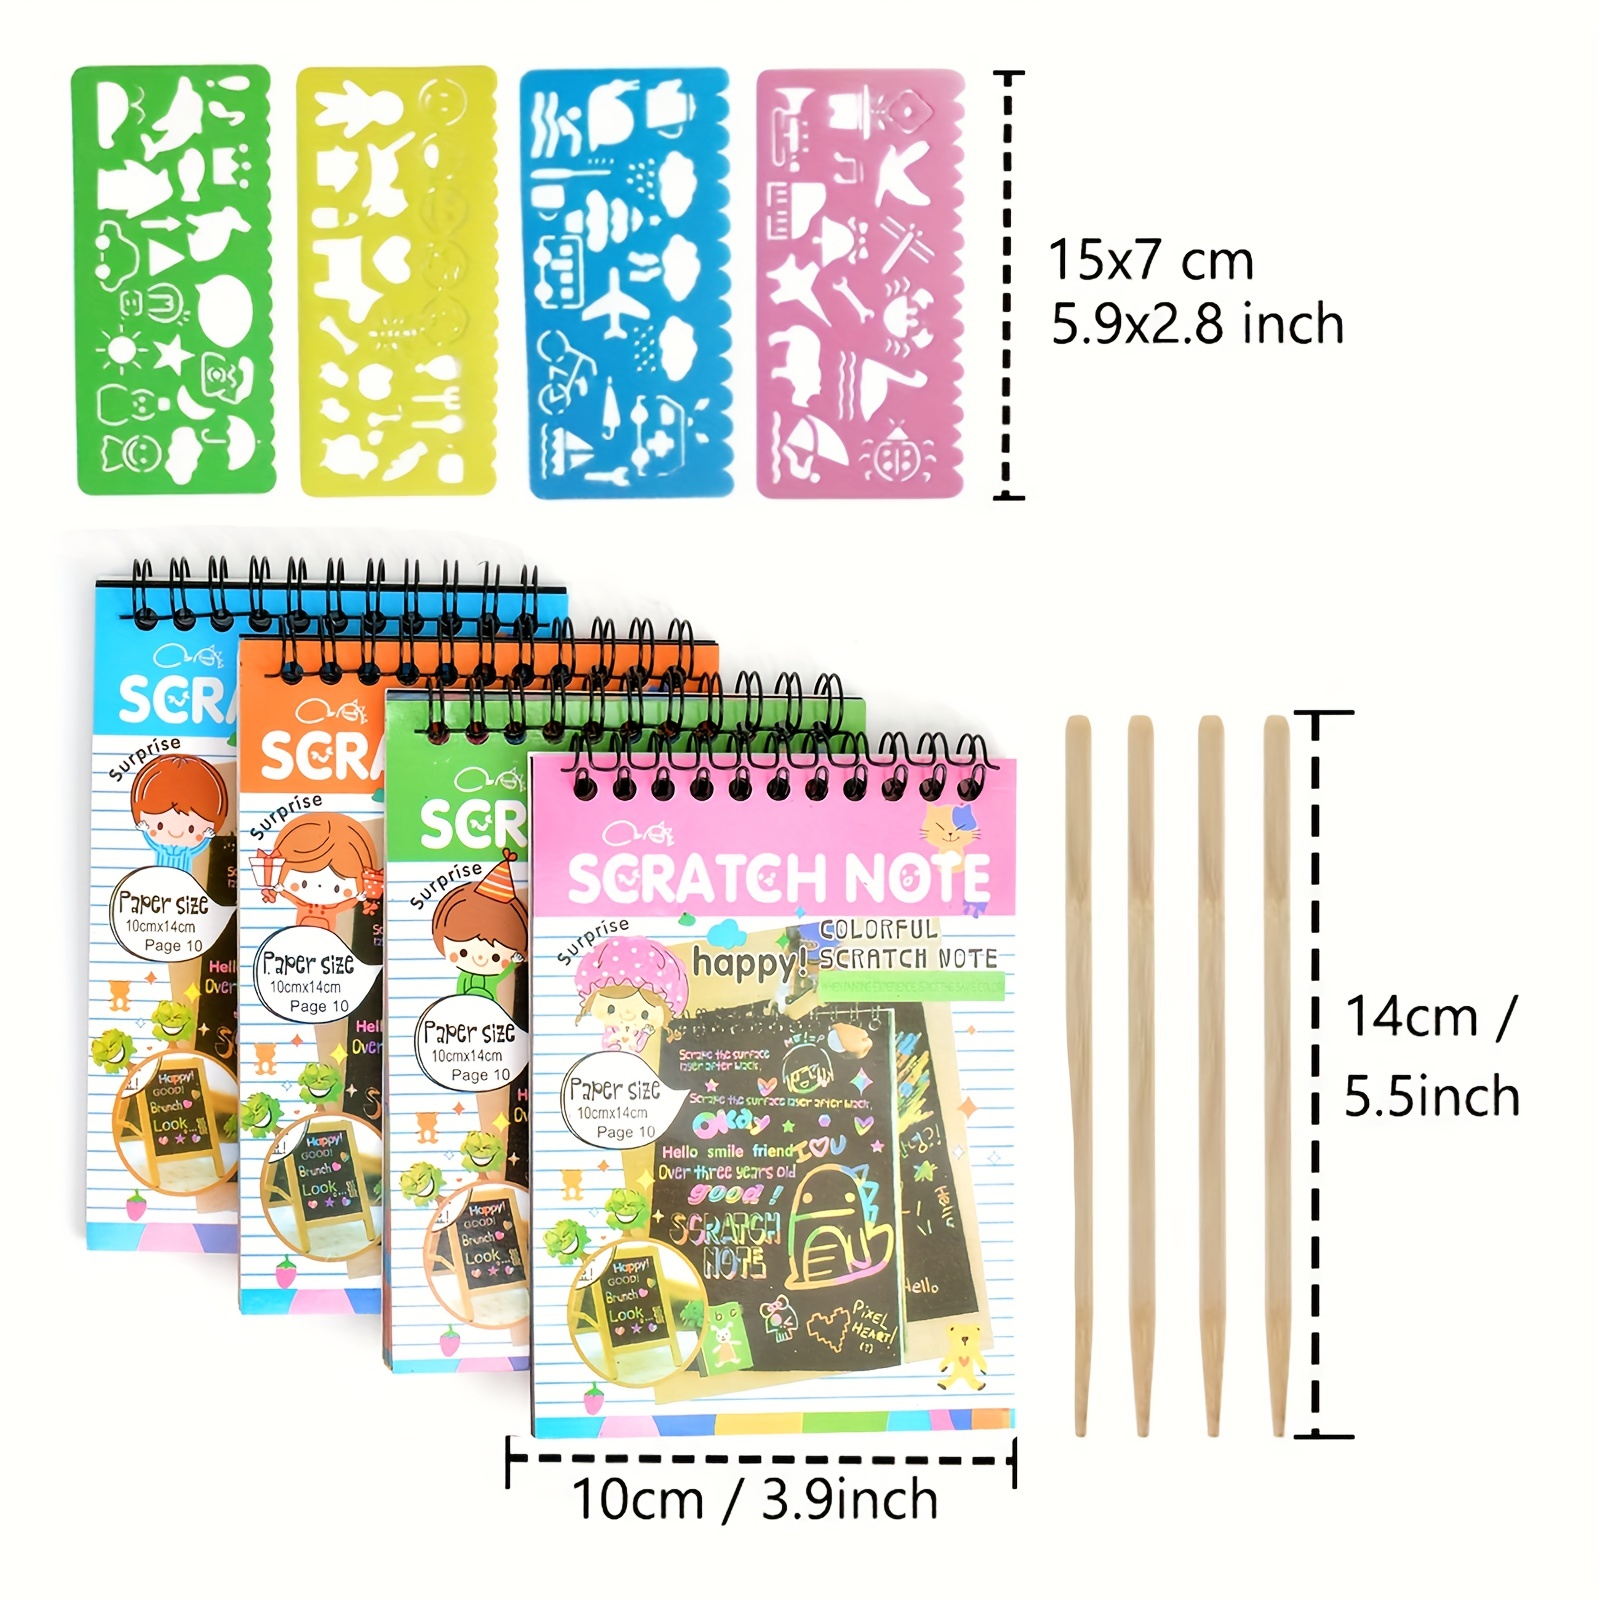 Great Choice Products 16 Pack Scratch Notebooks Art And Crafts